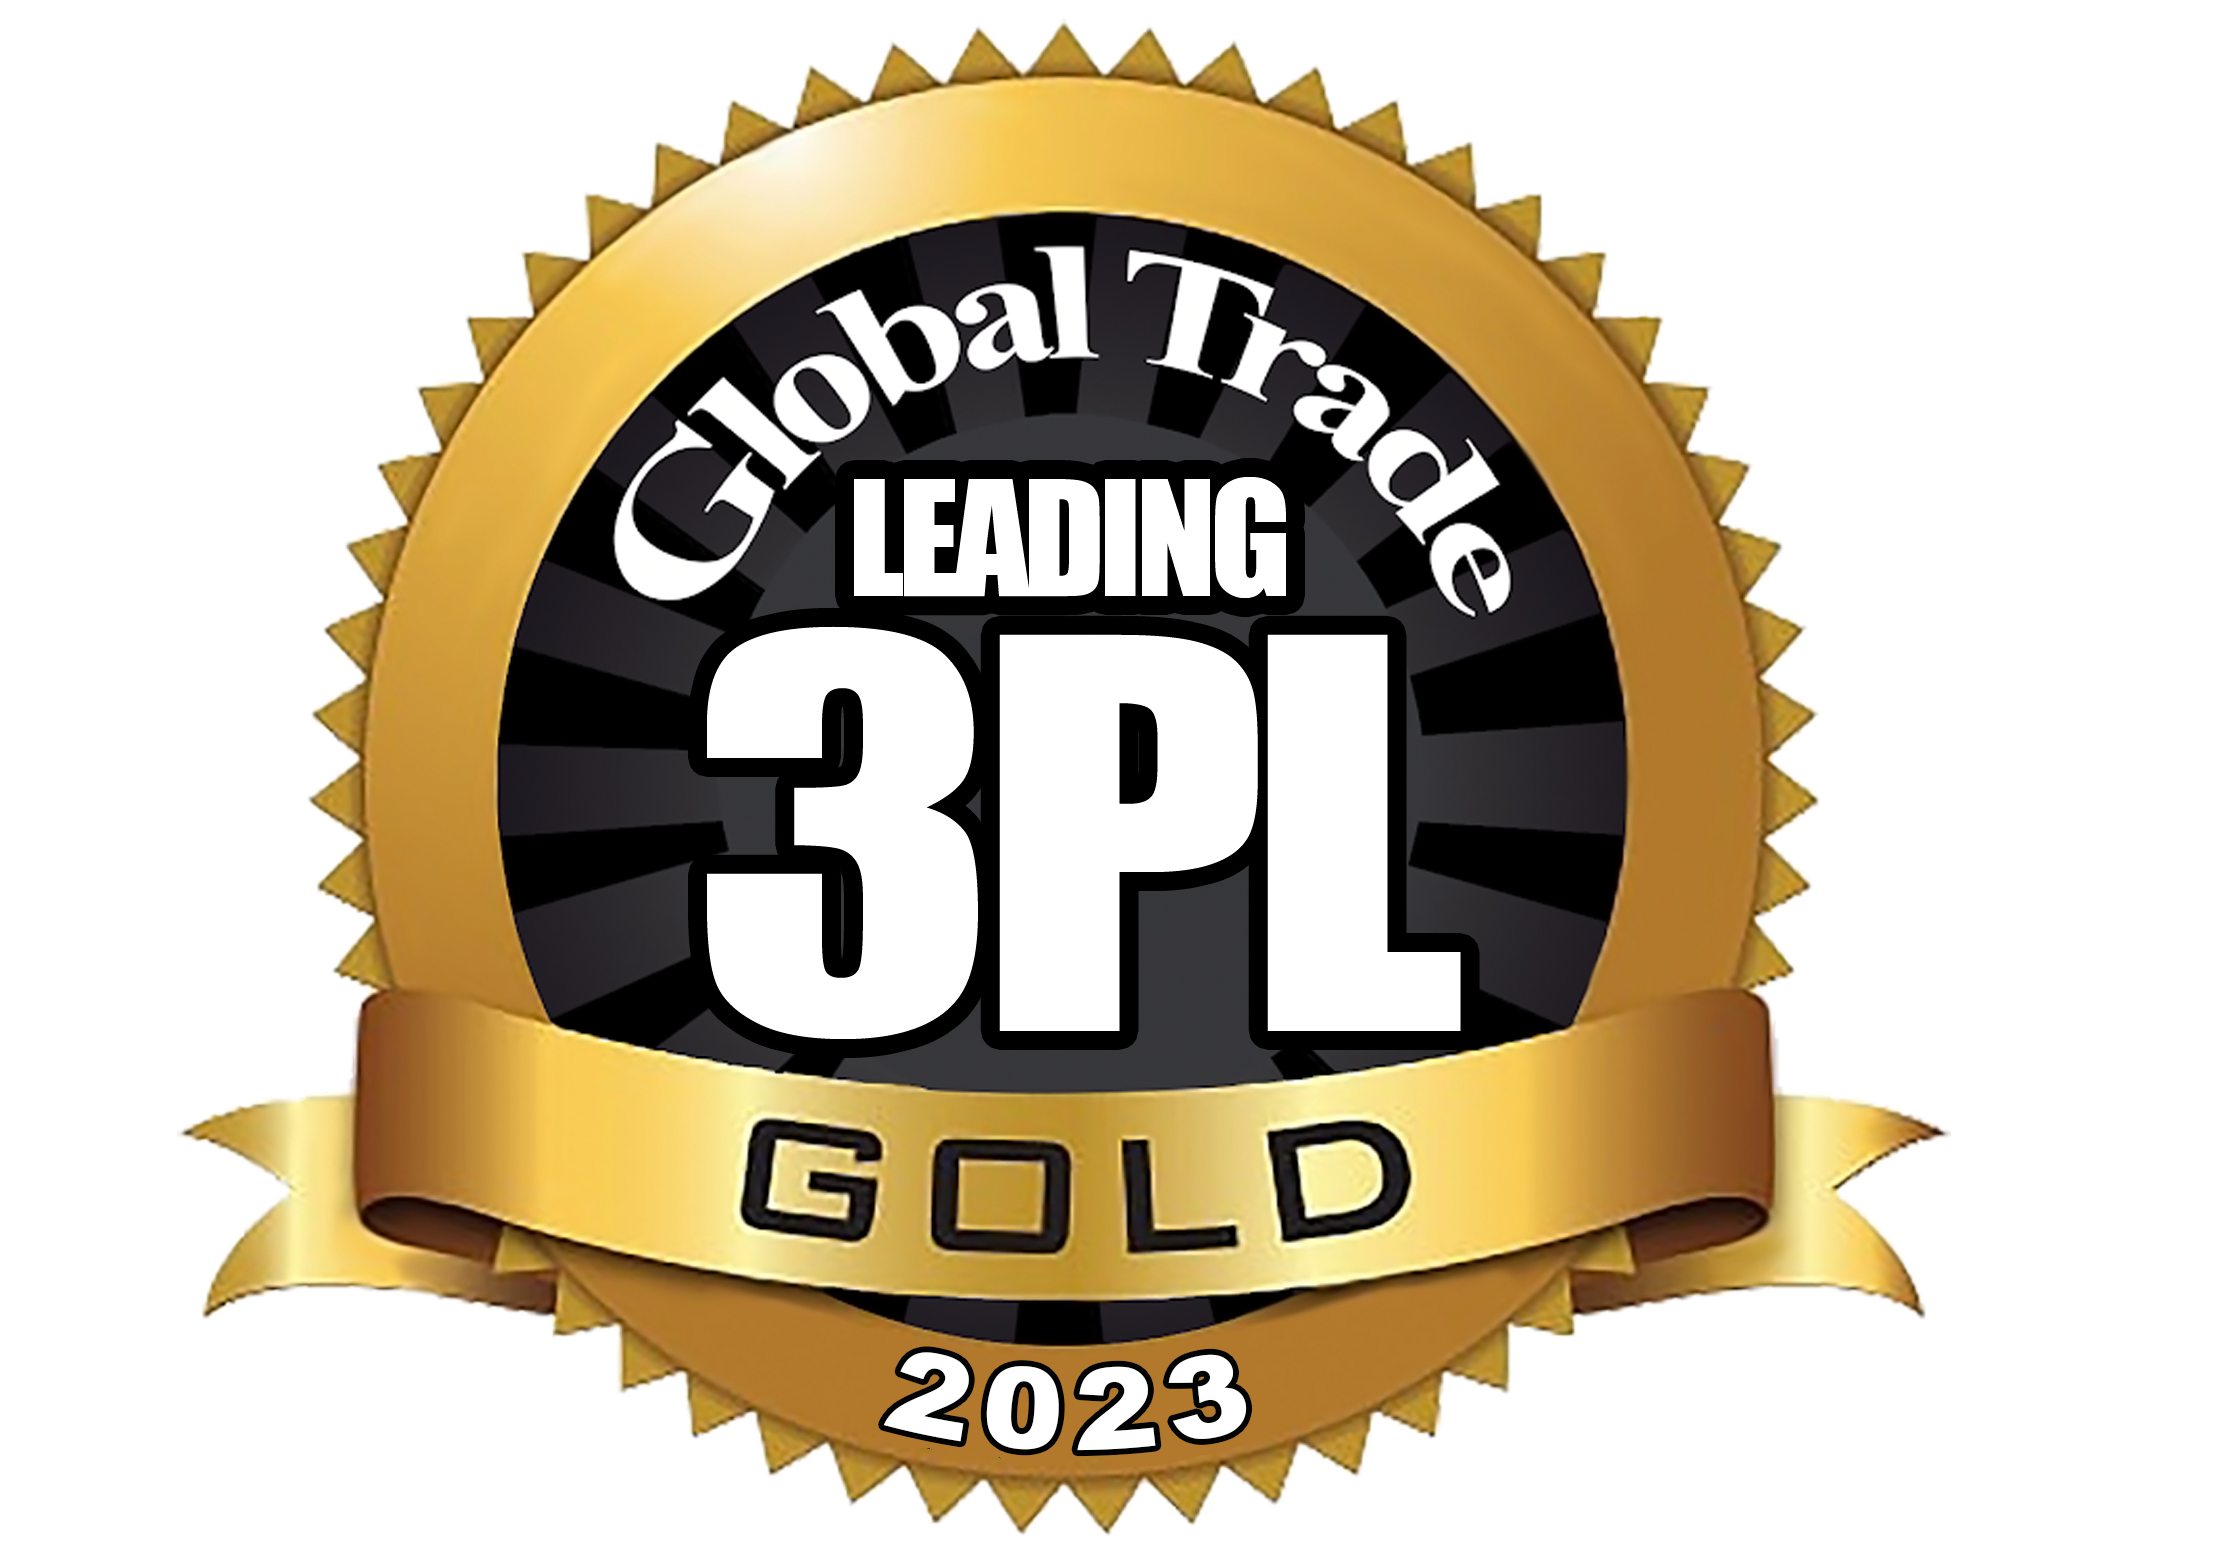 Global Trade Leading 3PL 2023